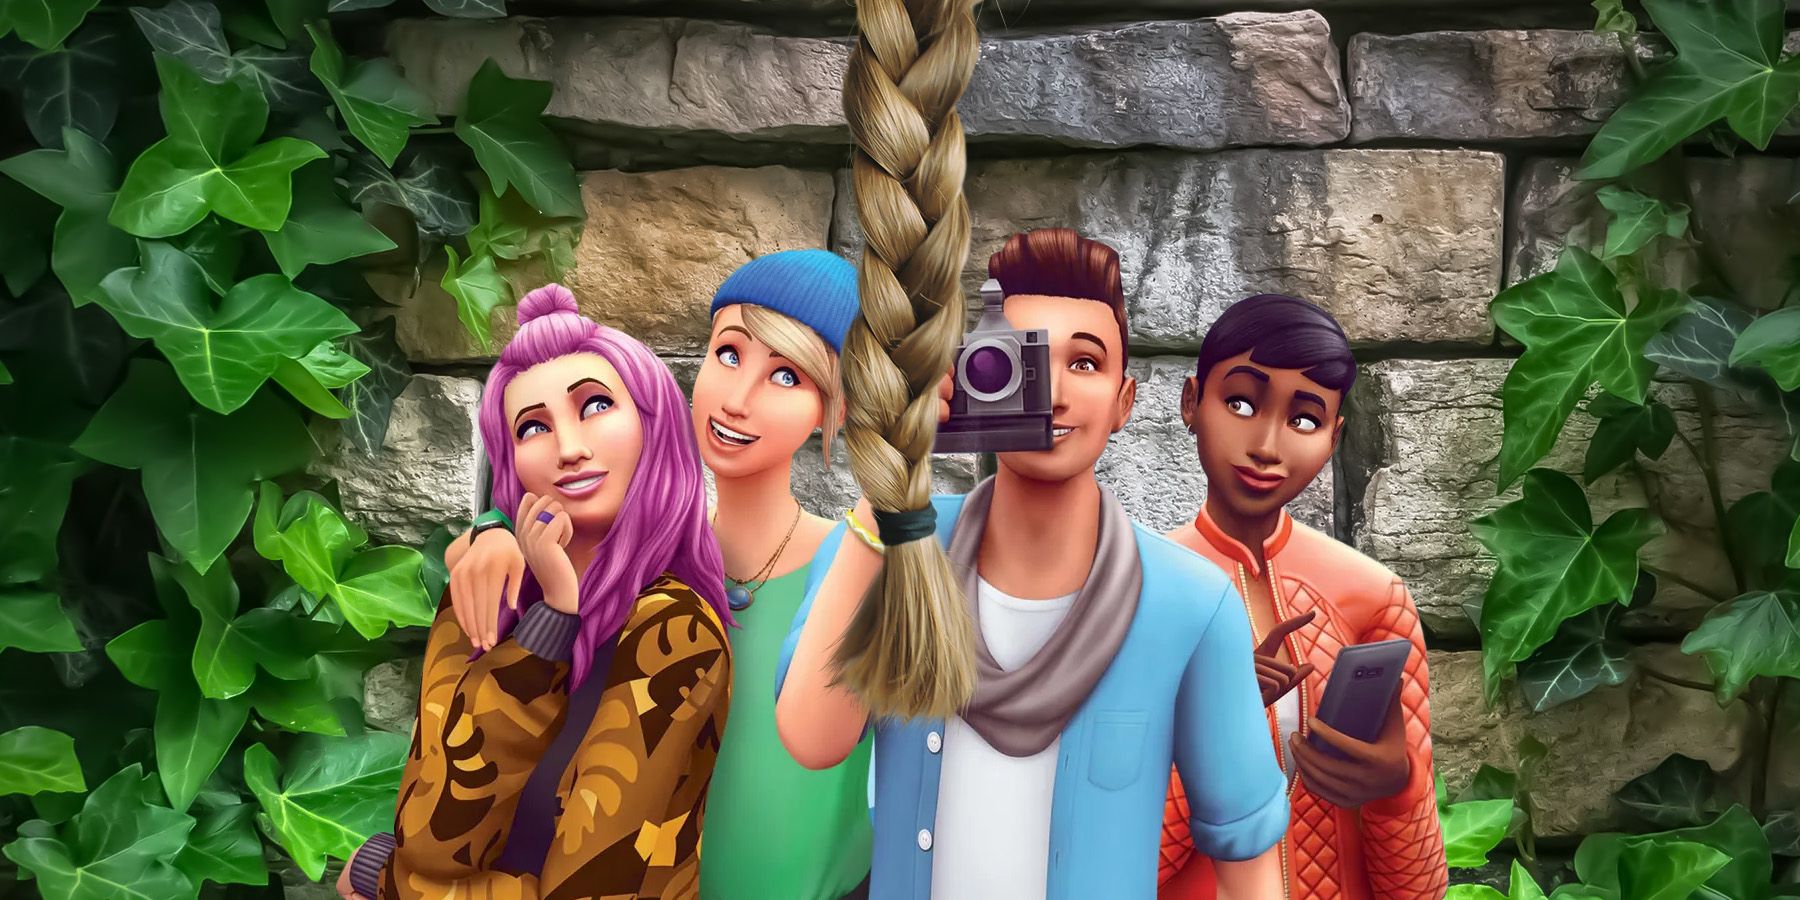 the-sims-4-player-builds-rapunzel-tower-in-game-gamerant